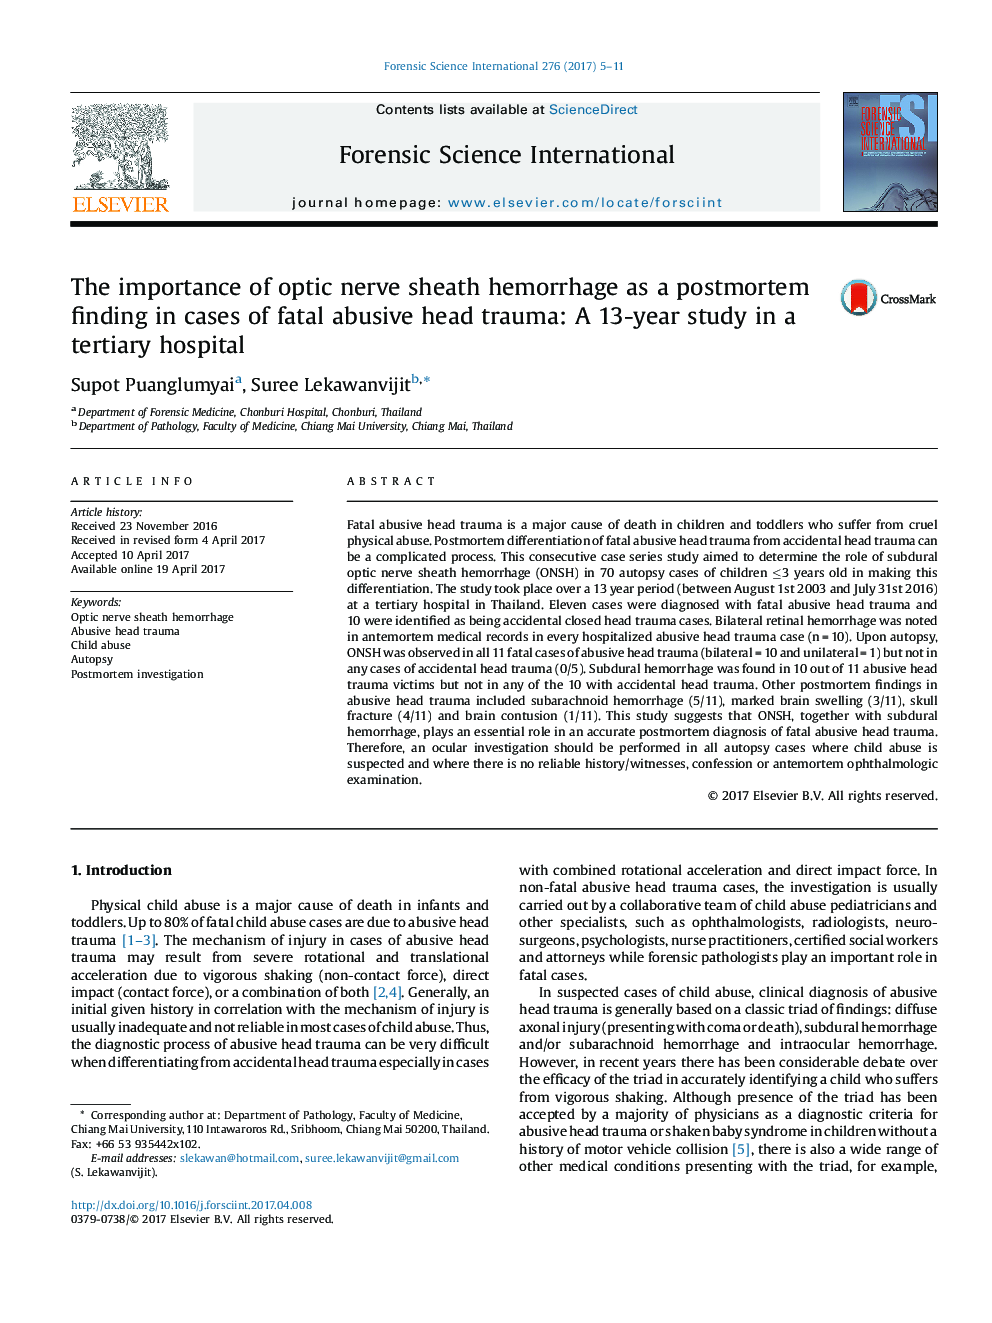 The importance of optic nerve sheath hemorrhage as a postmortem finding in cases of fatal abusive head trauma: A 13-year study in a tertiary hospital